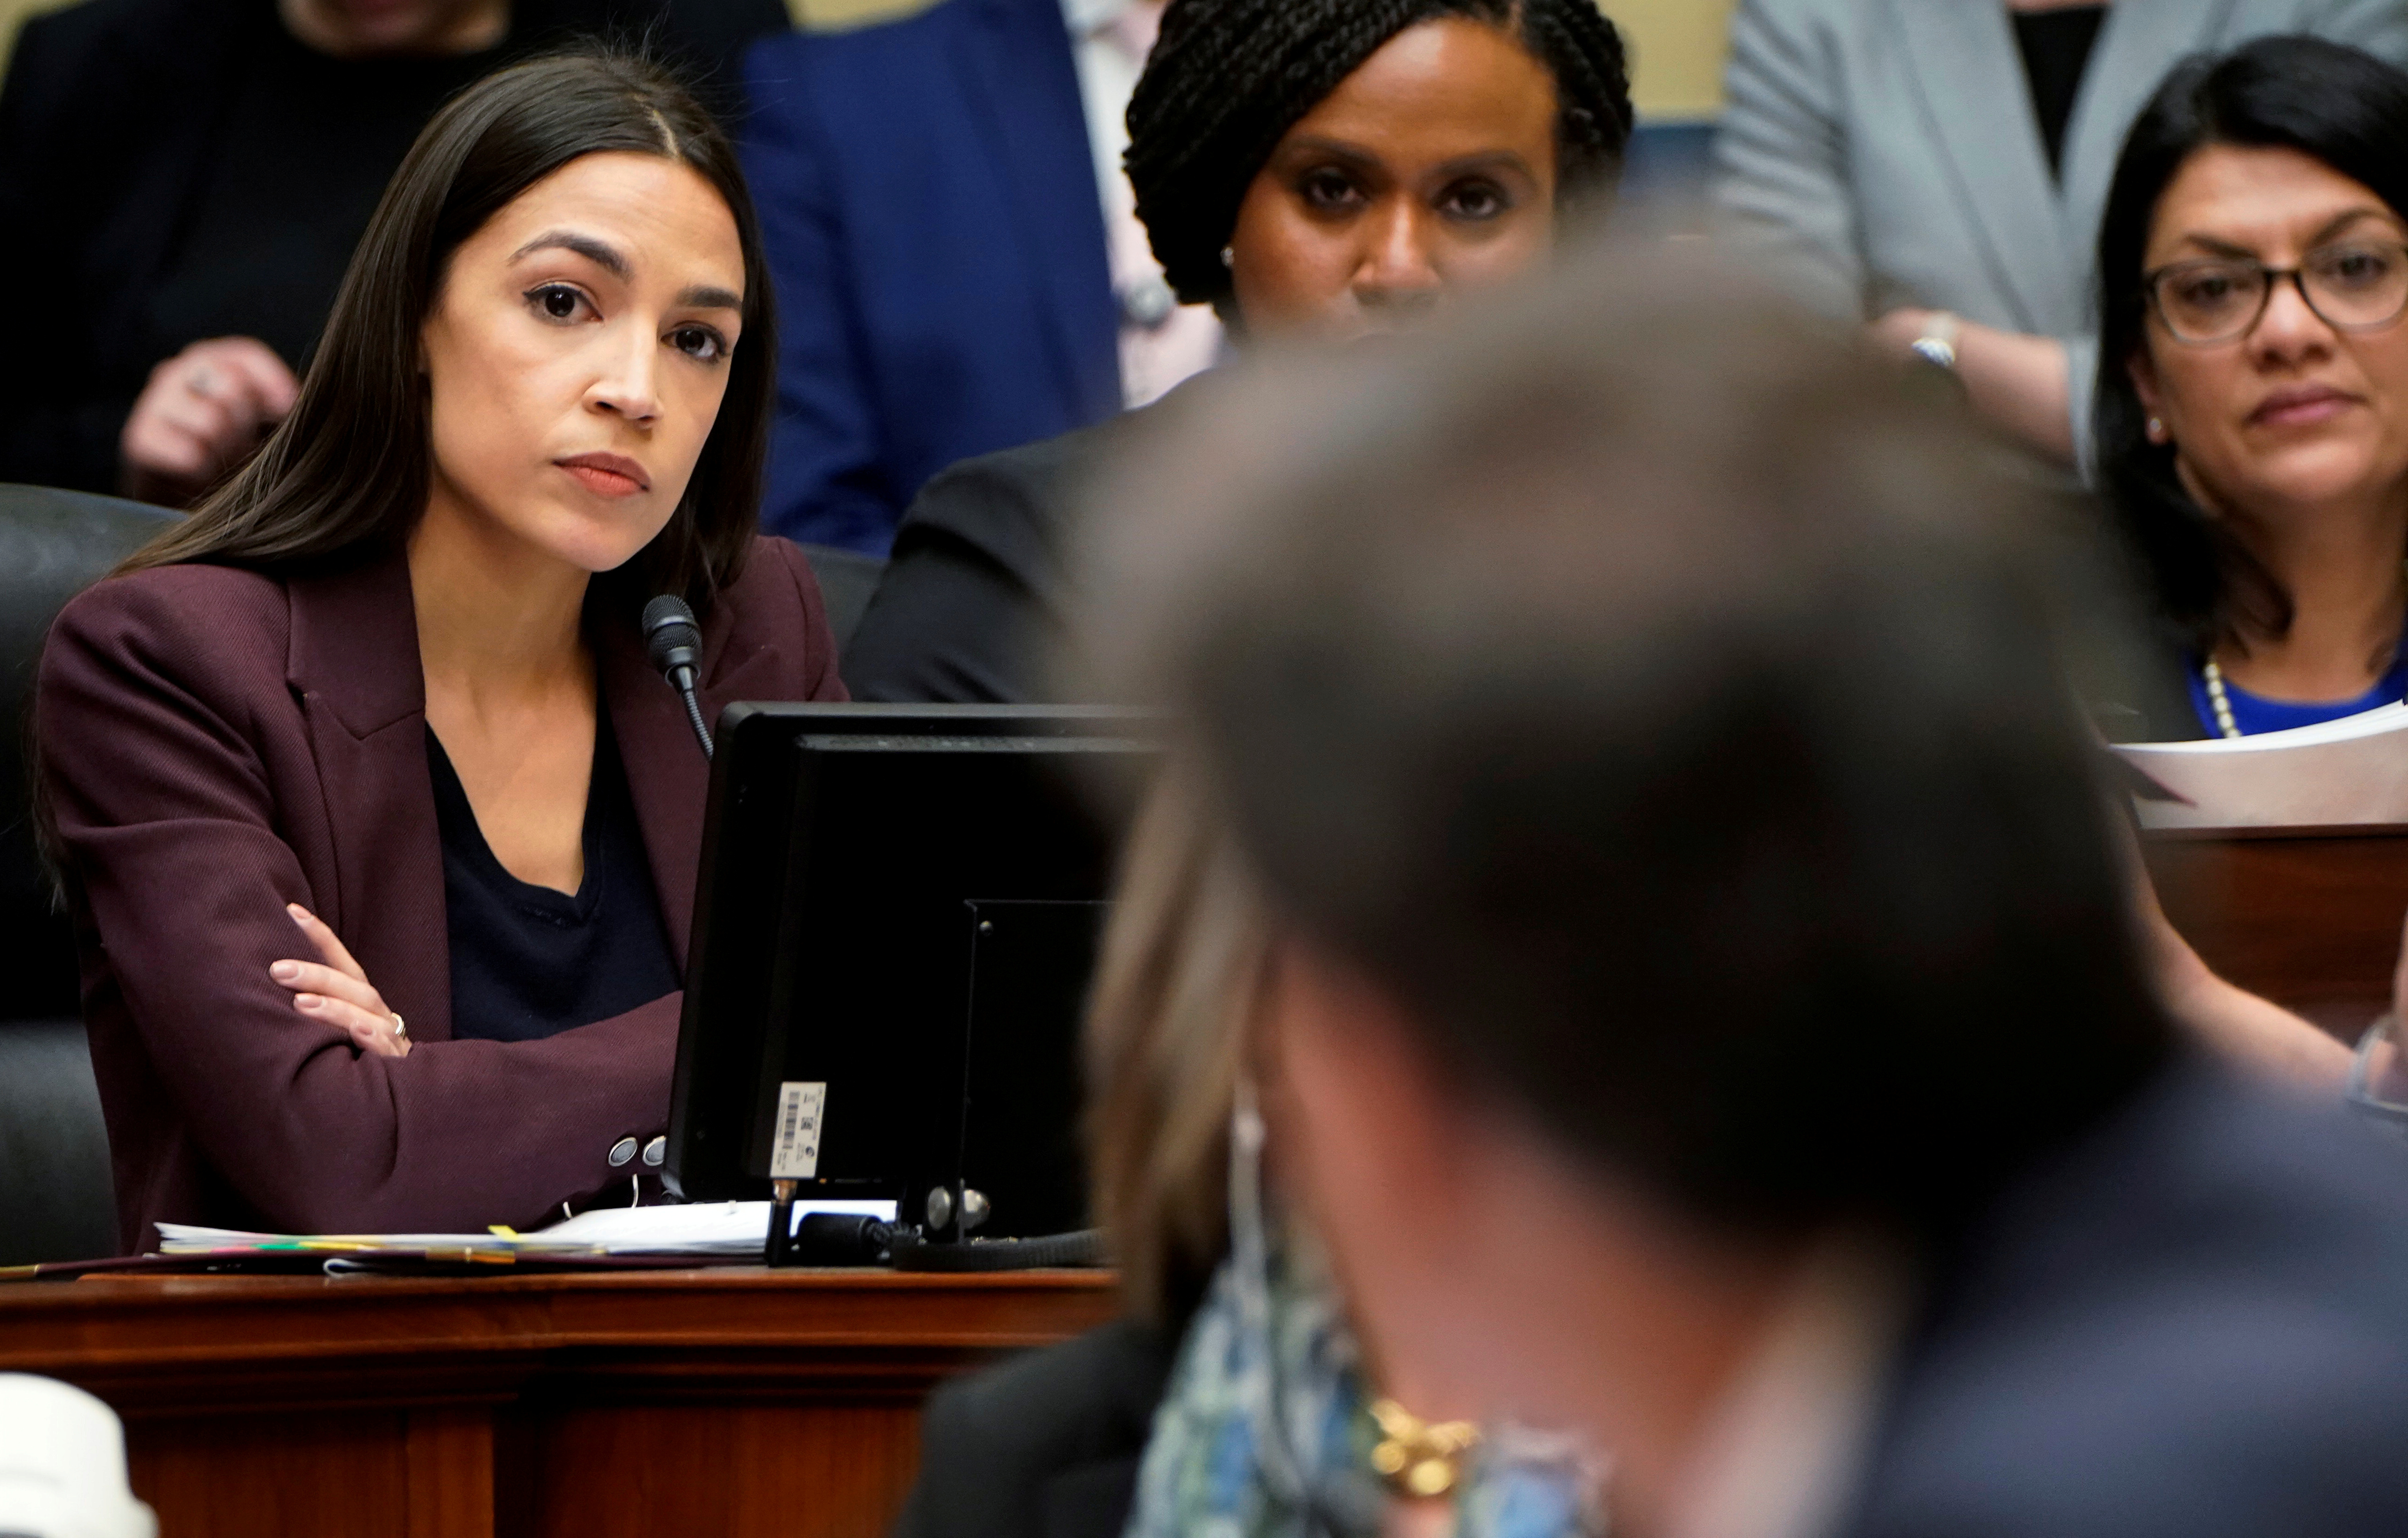 U.S. Rep. Alexandria Ocasio-Cortez (D-NY), Rep. Ayanna Pressley (D-MA) and Rep. Rashida Tlaib (D-MI) listen to former Trump personal attorney Michael Cohen answer a question from Ocasio-Cortez during his testimony at a House Committee on Oversight and Reform hearing on Capitol Hill in Washington, U.S., February 27, 2019. REUTERS/Joshua Roberts